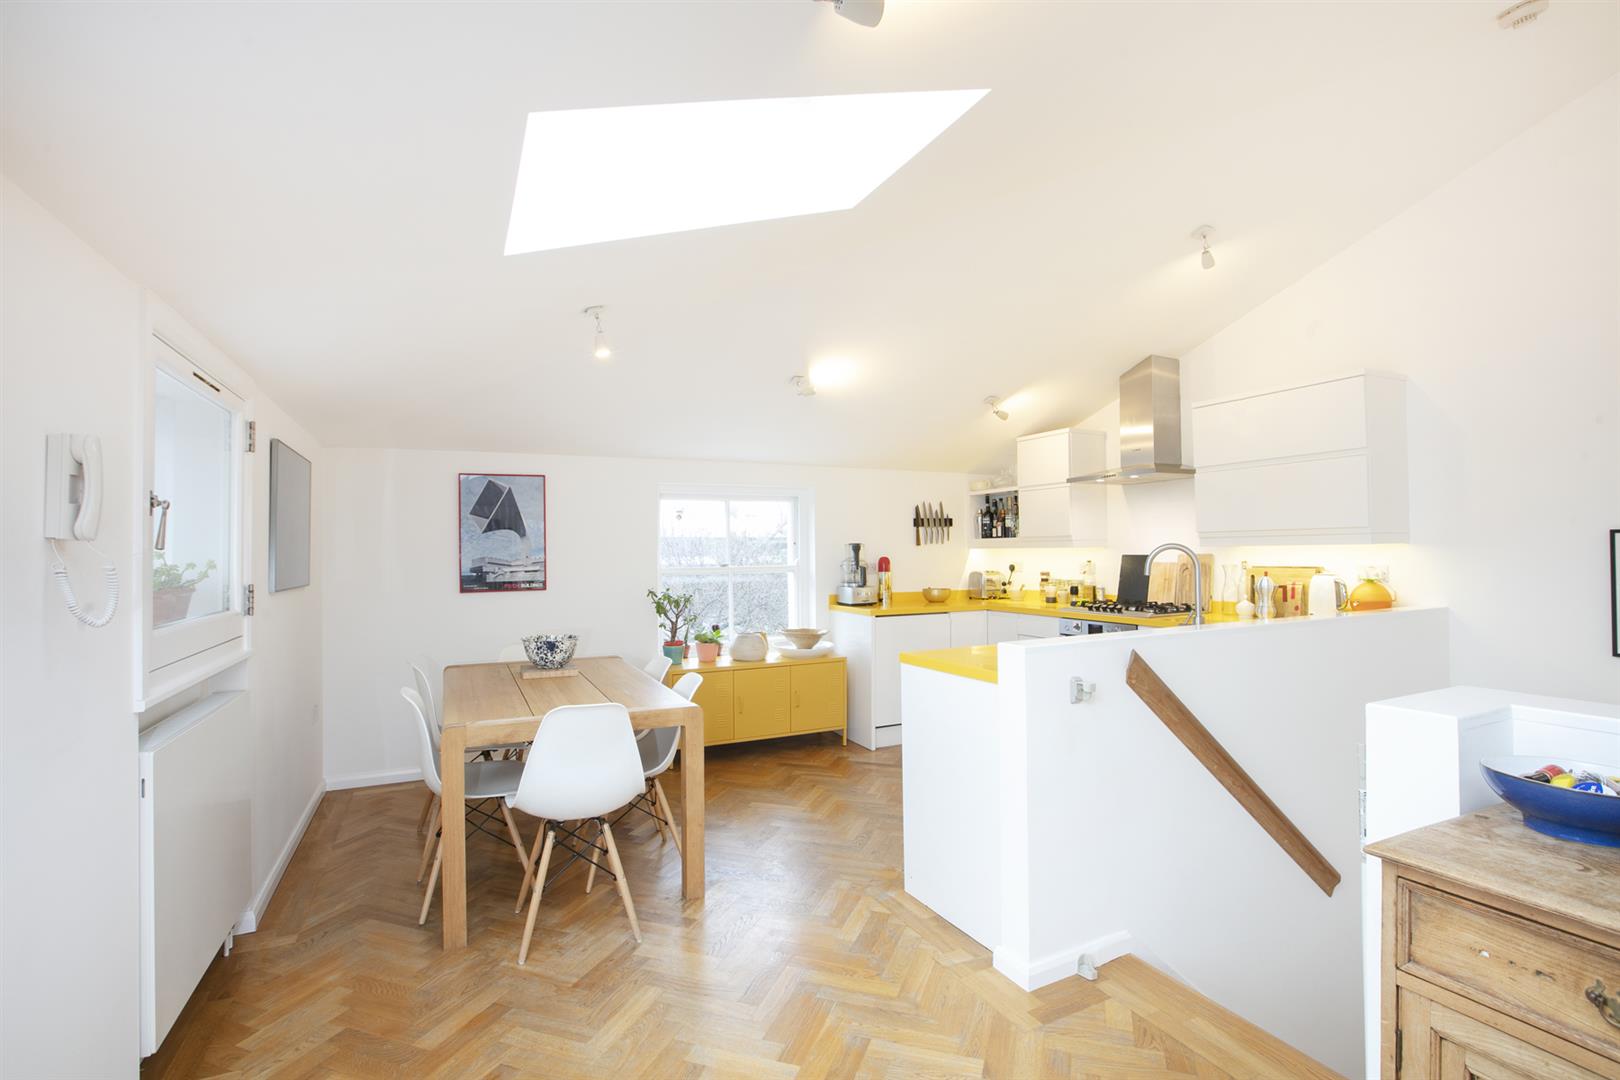 Flat - Conversion For Sale in Holly Grove, Peckham, SE15 893 view9